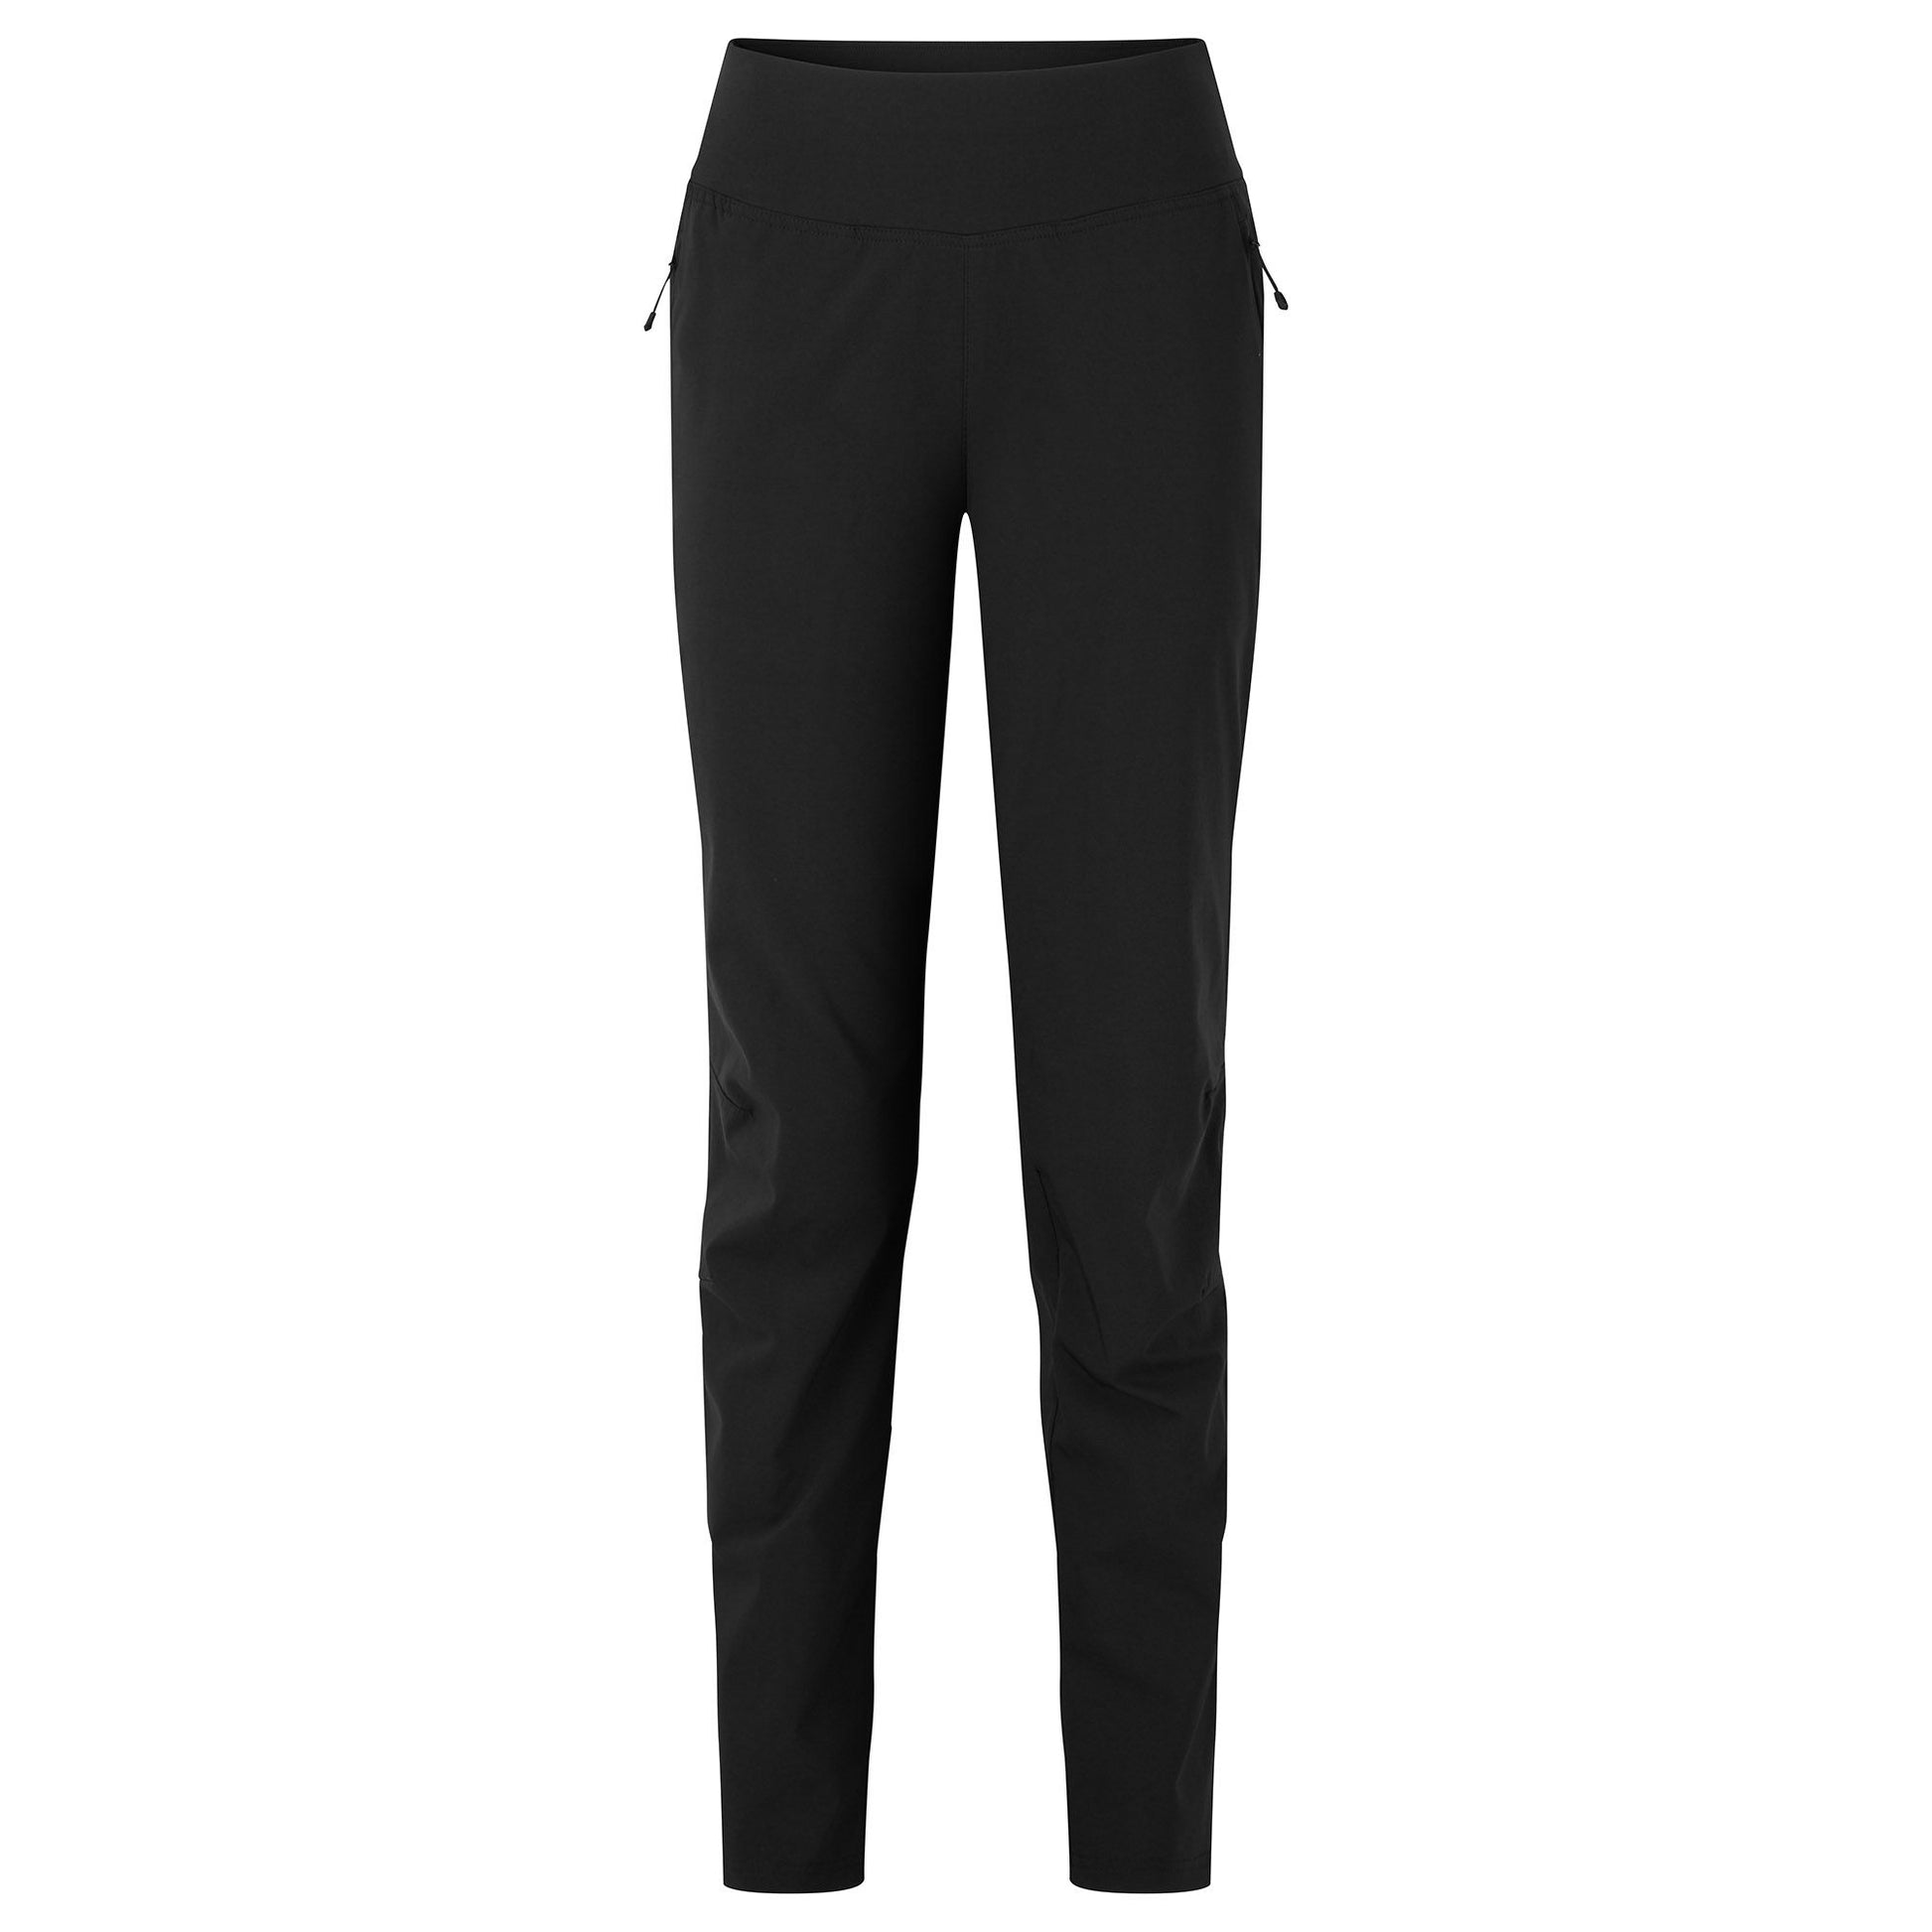 Montane Women's Tucana Lite Stretch Pants Stretchy, lightweight trousers for women